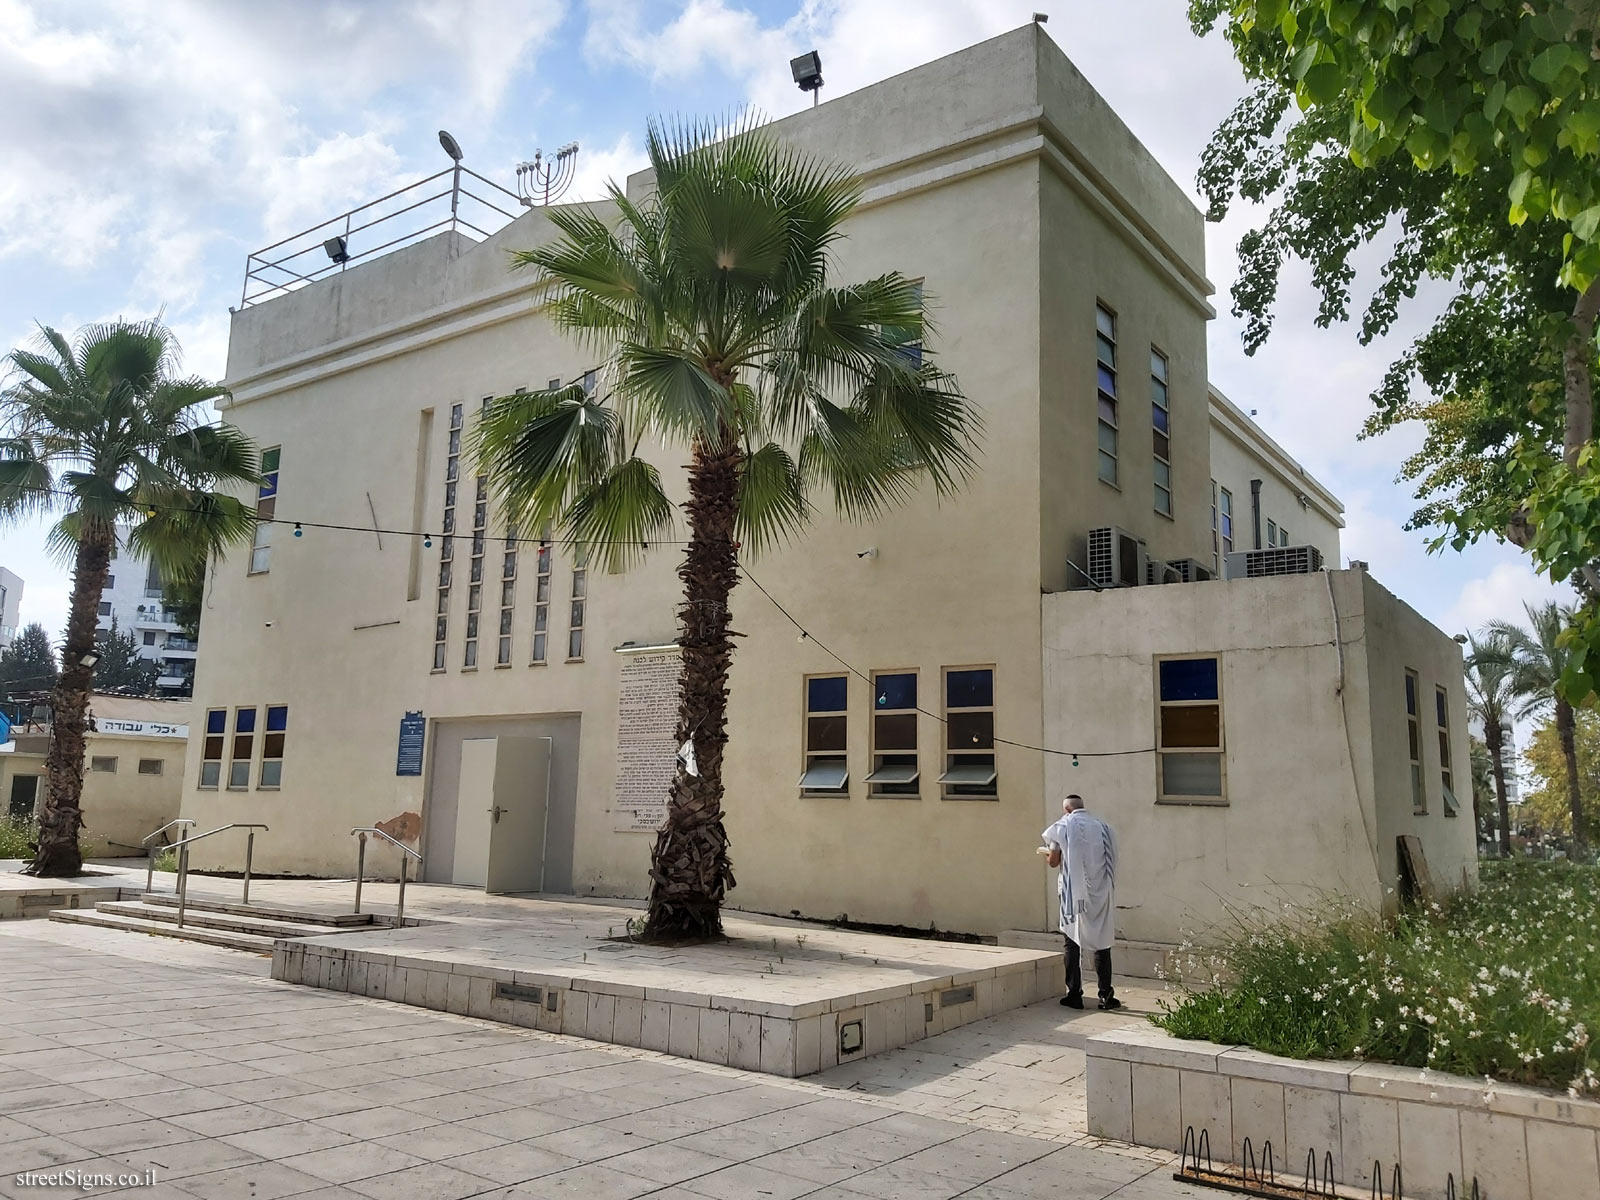 Heritage Sites in Israel - The Central Synagogue - Magdiel - Sokolov St 2, Hod Hasharon, Israel